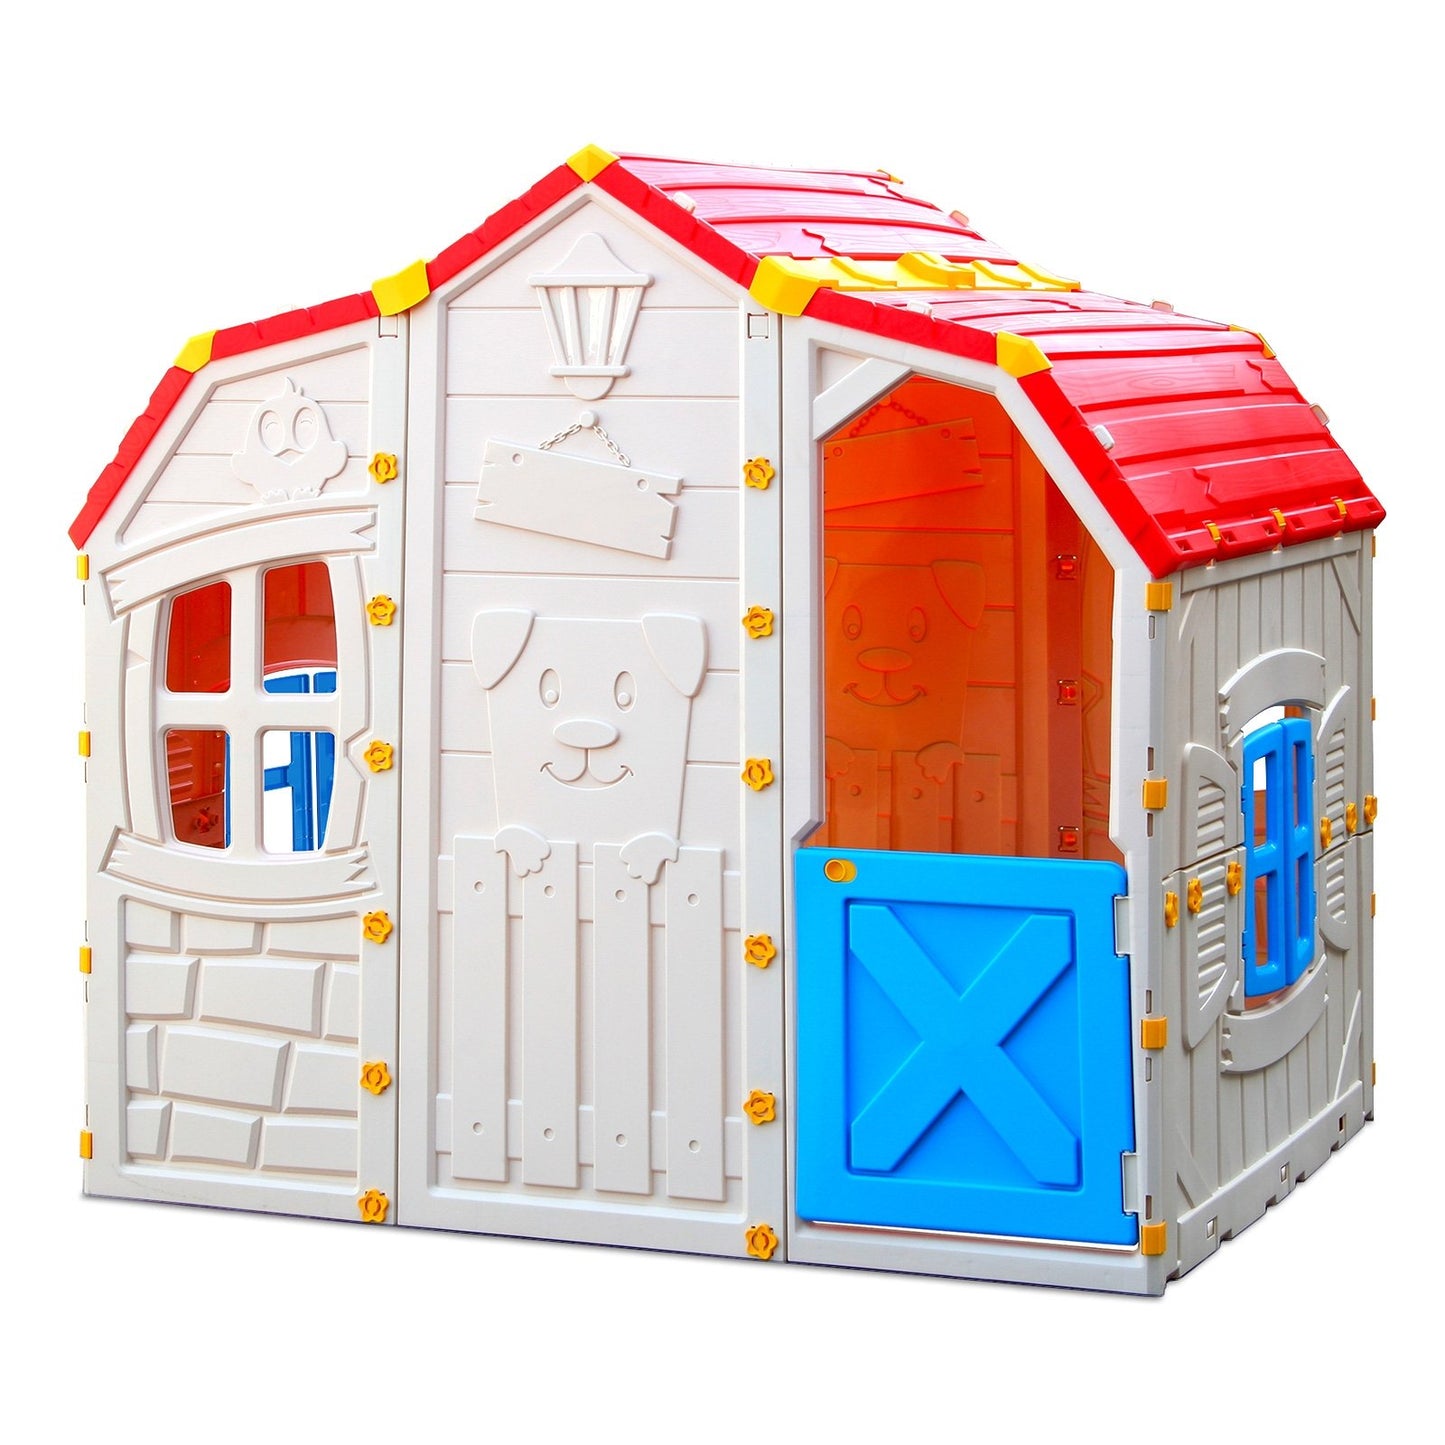 Cottage Kids Playhouse with Openable Windows and Working Door, Multicolor